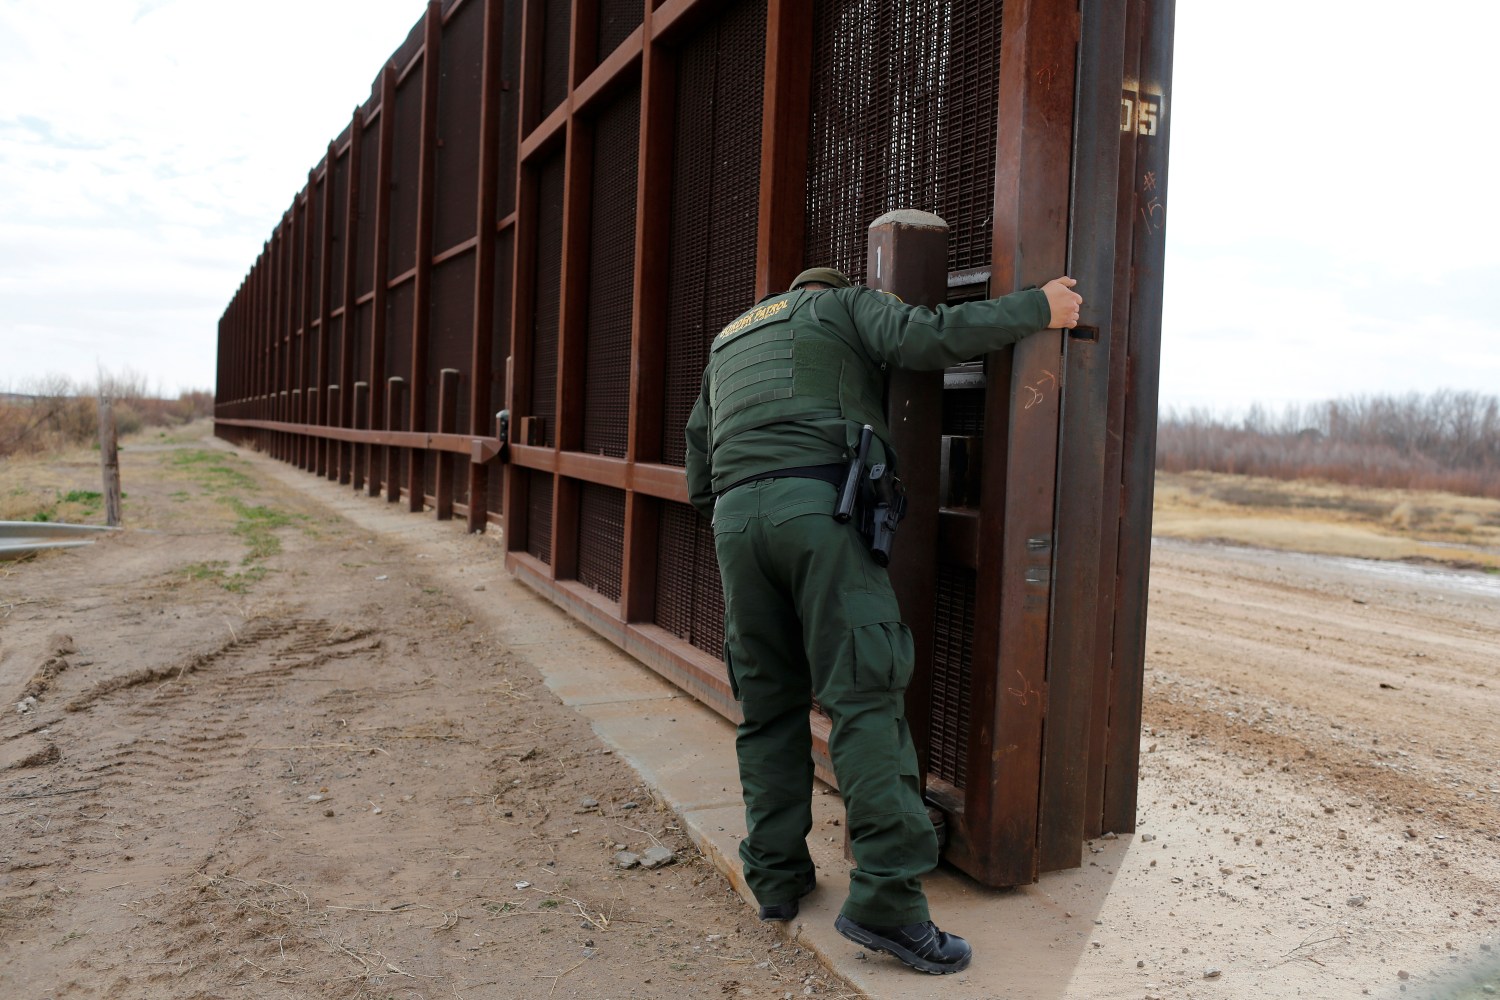 A U.S. Border patrol agent opens a gate on the fence along the Mexico border to allow vehicles pass in El Paso, U.S. January 17, 2017. Picture taken January 17, 2017. REUTERS/Tomas Bravo - RC1DE38C8710